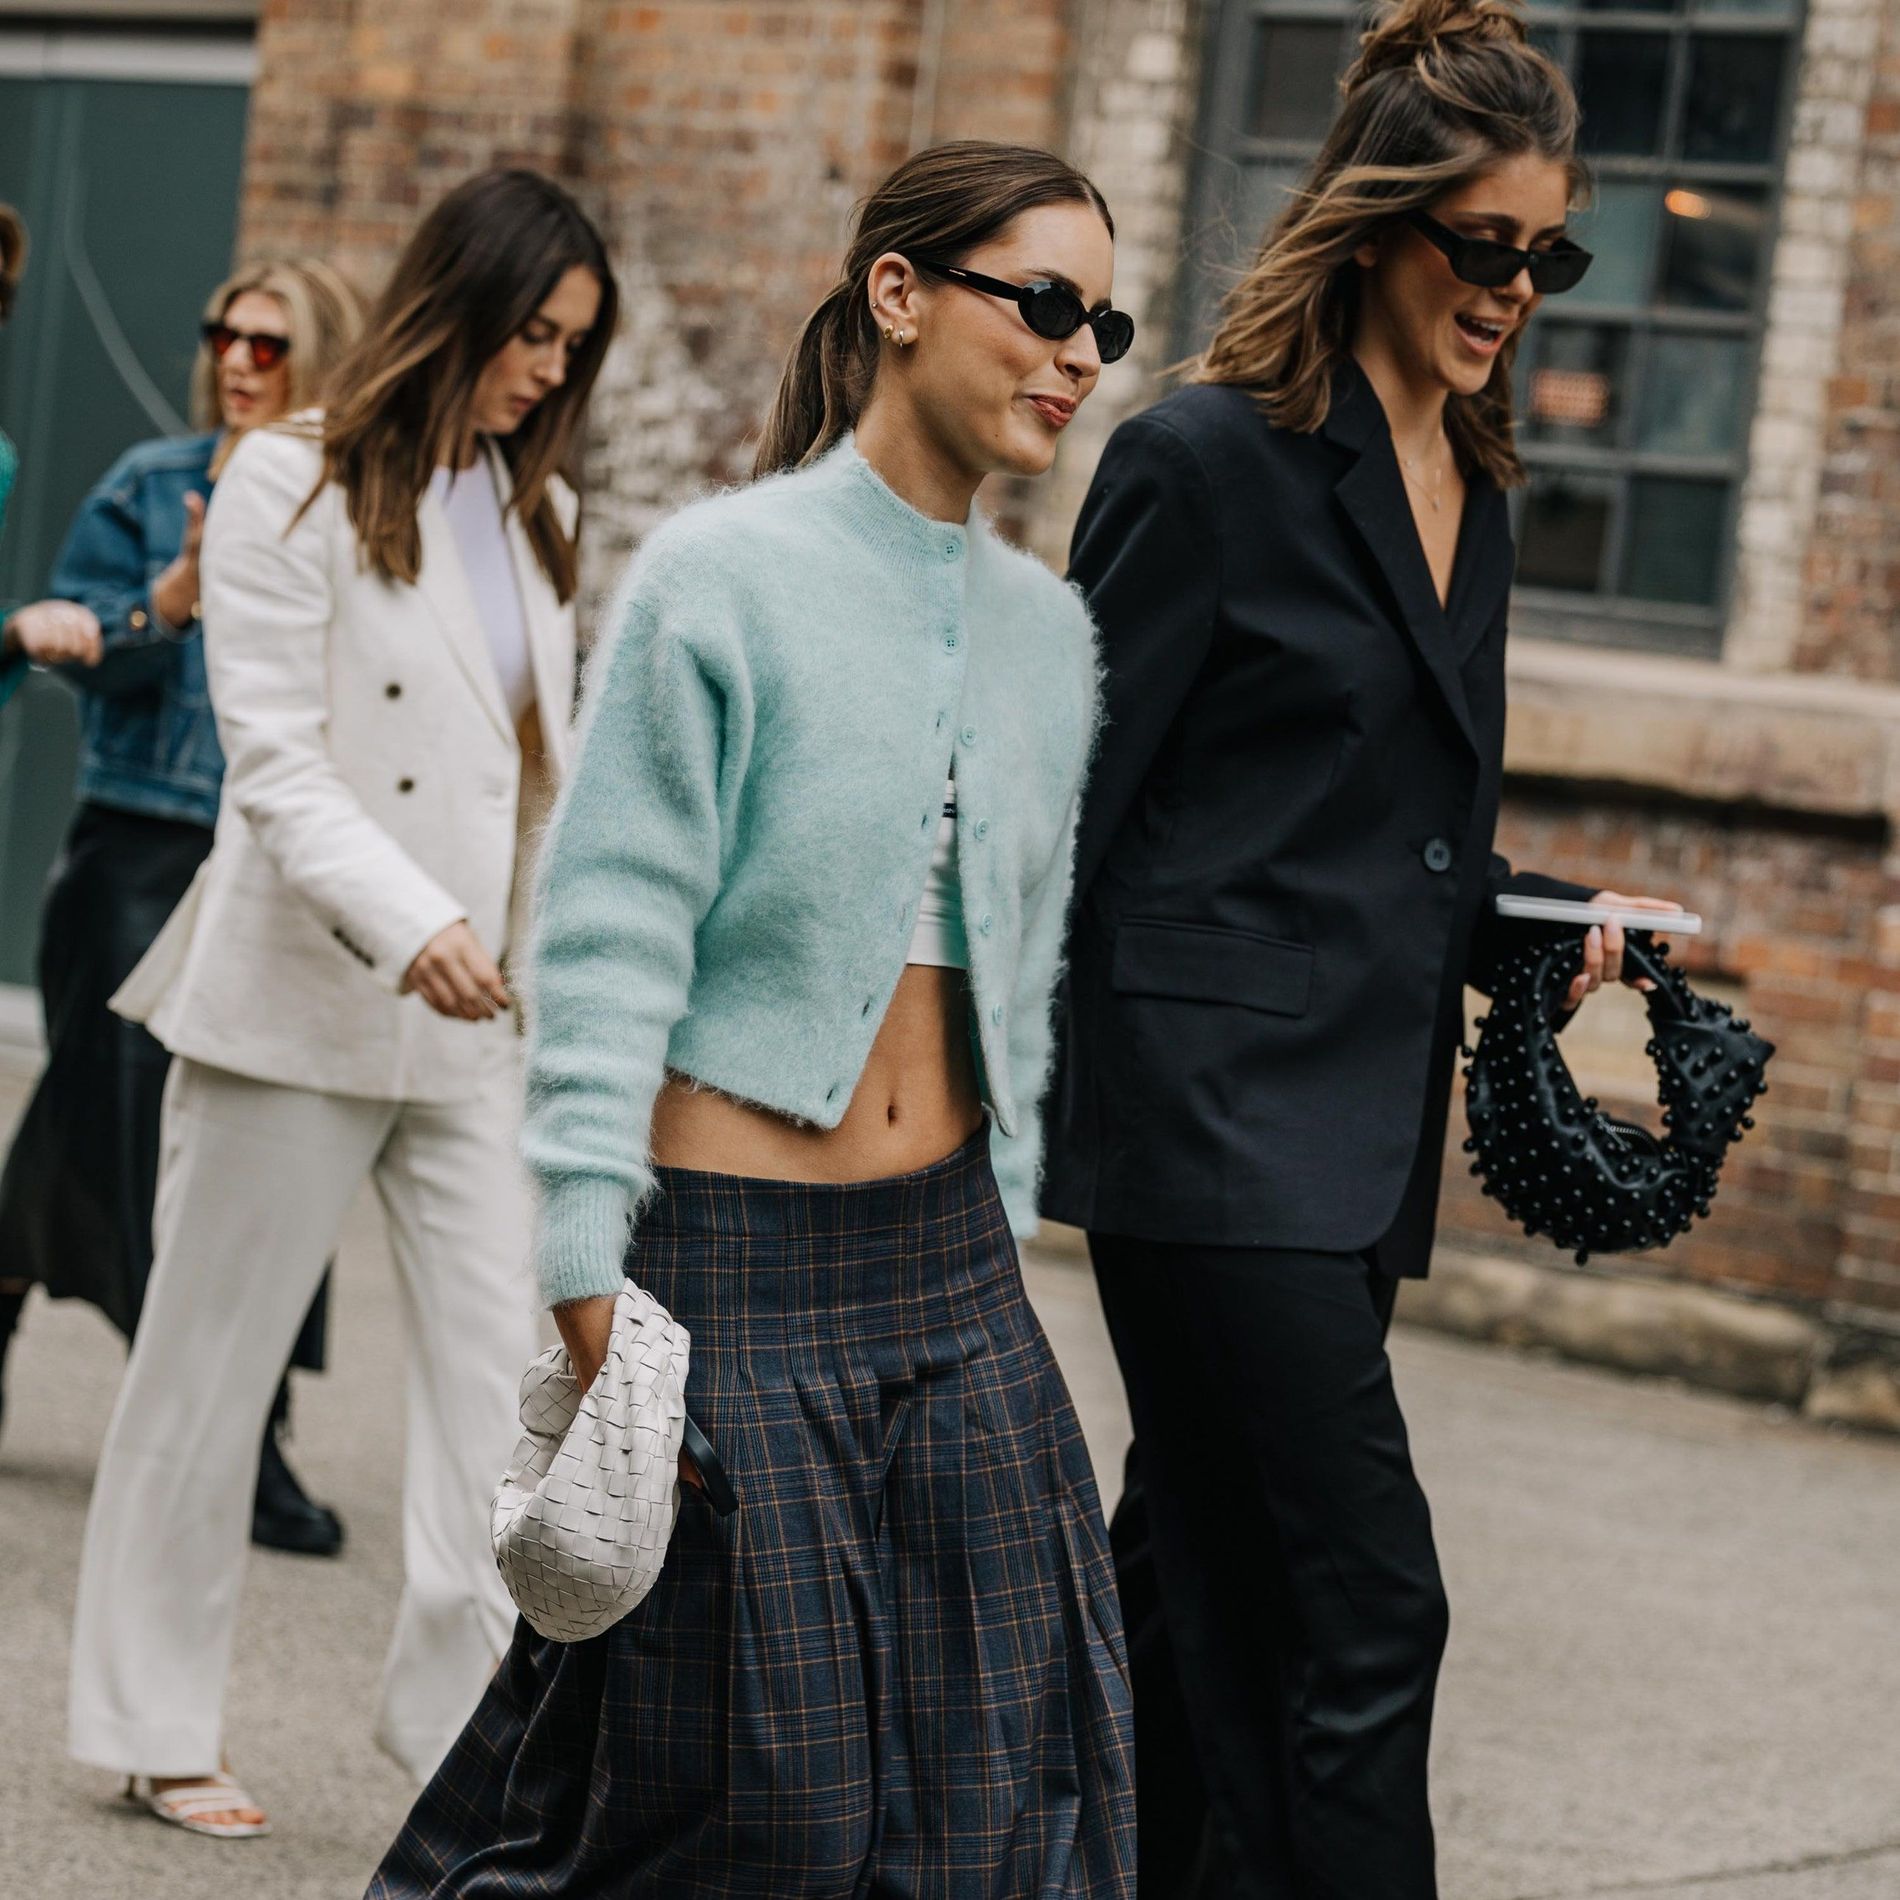 A cropped knit and low waist is the combo of choice for street